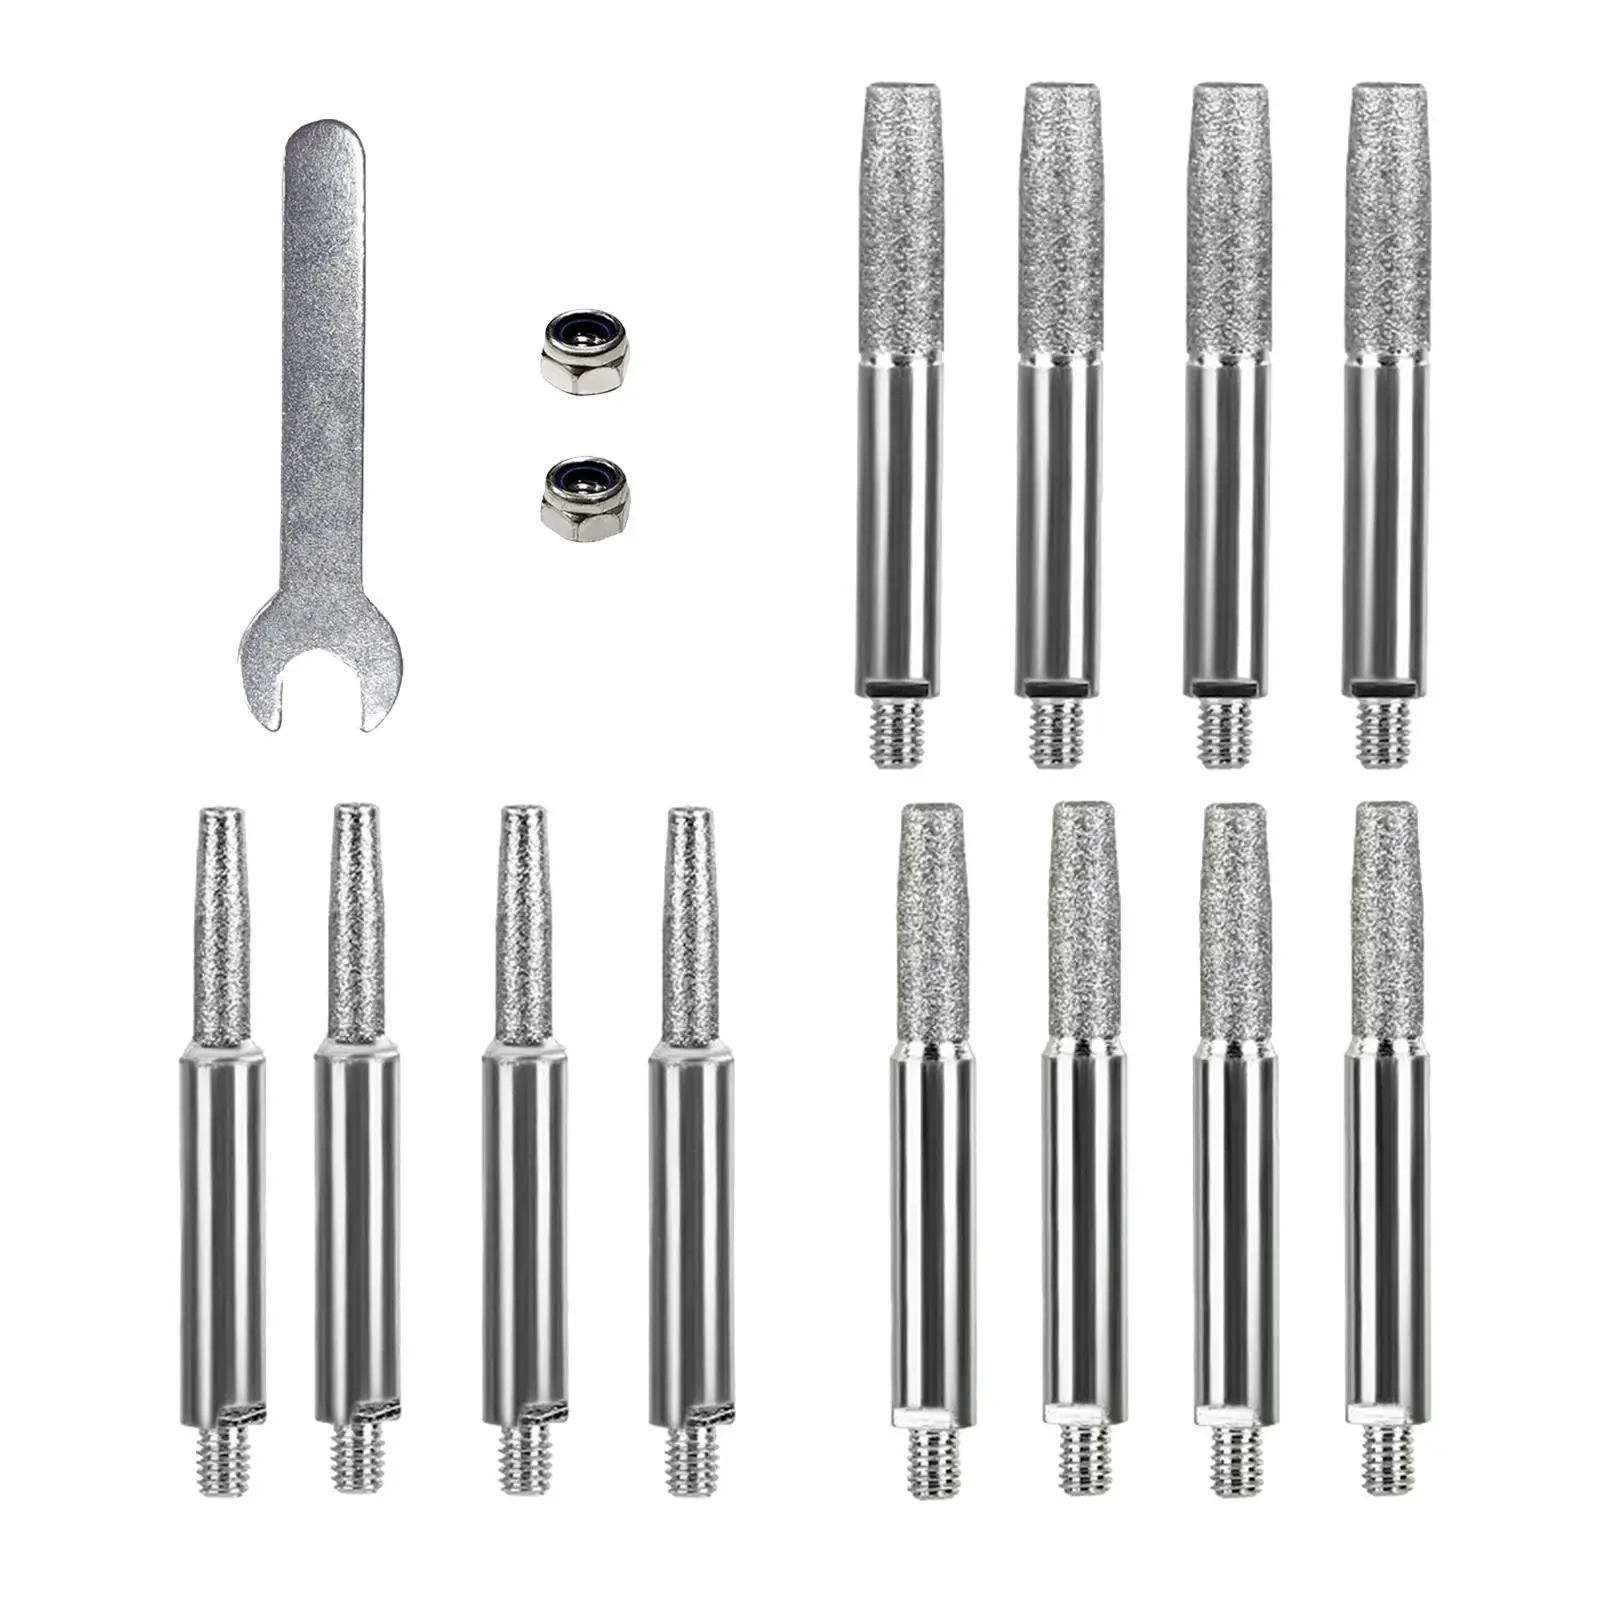 Burr Bit Set High Hardness Engraving Bit Replacement Wheels for Electric Saw Steel and Wood Working Drilling